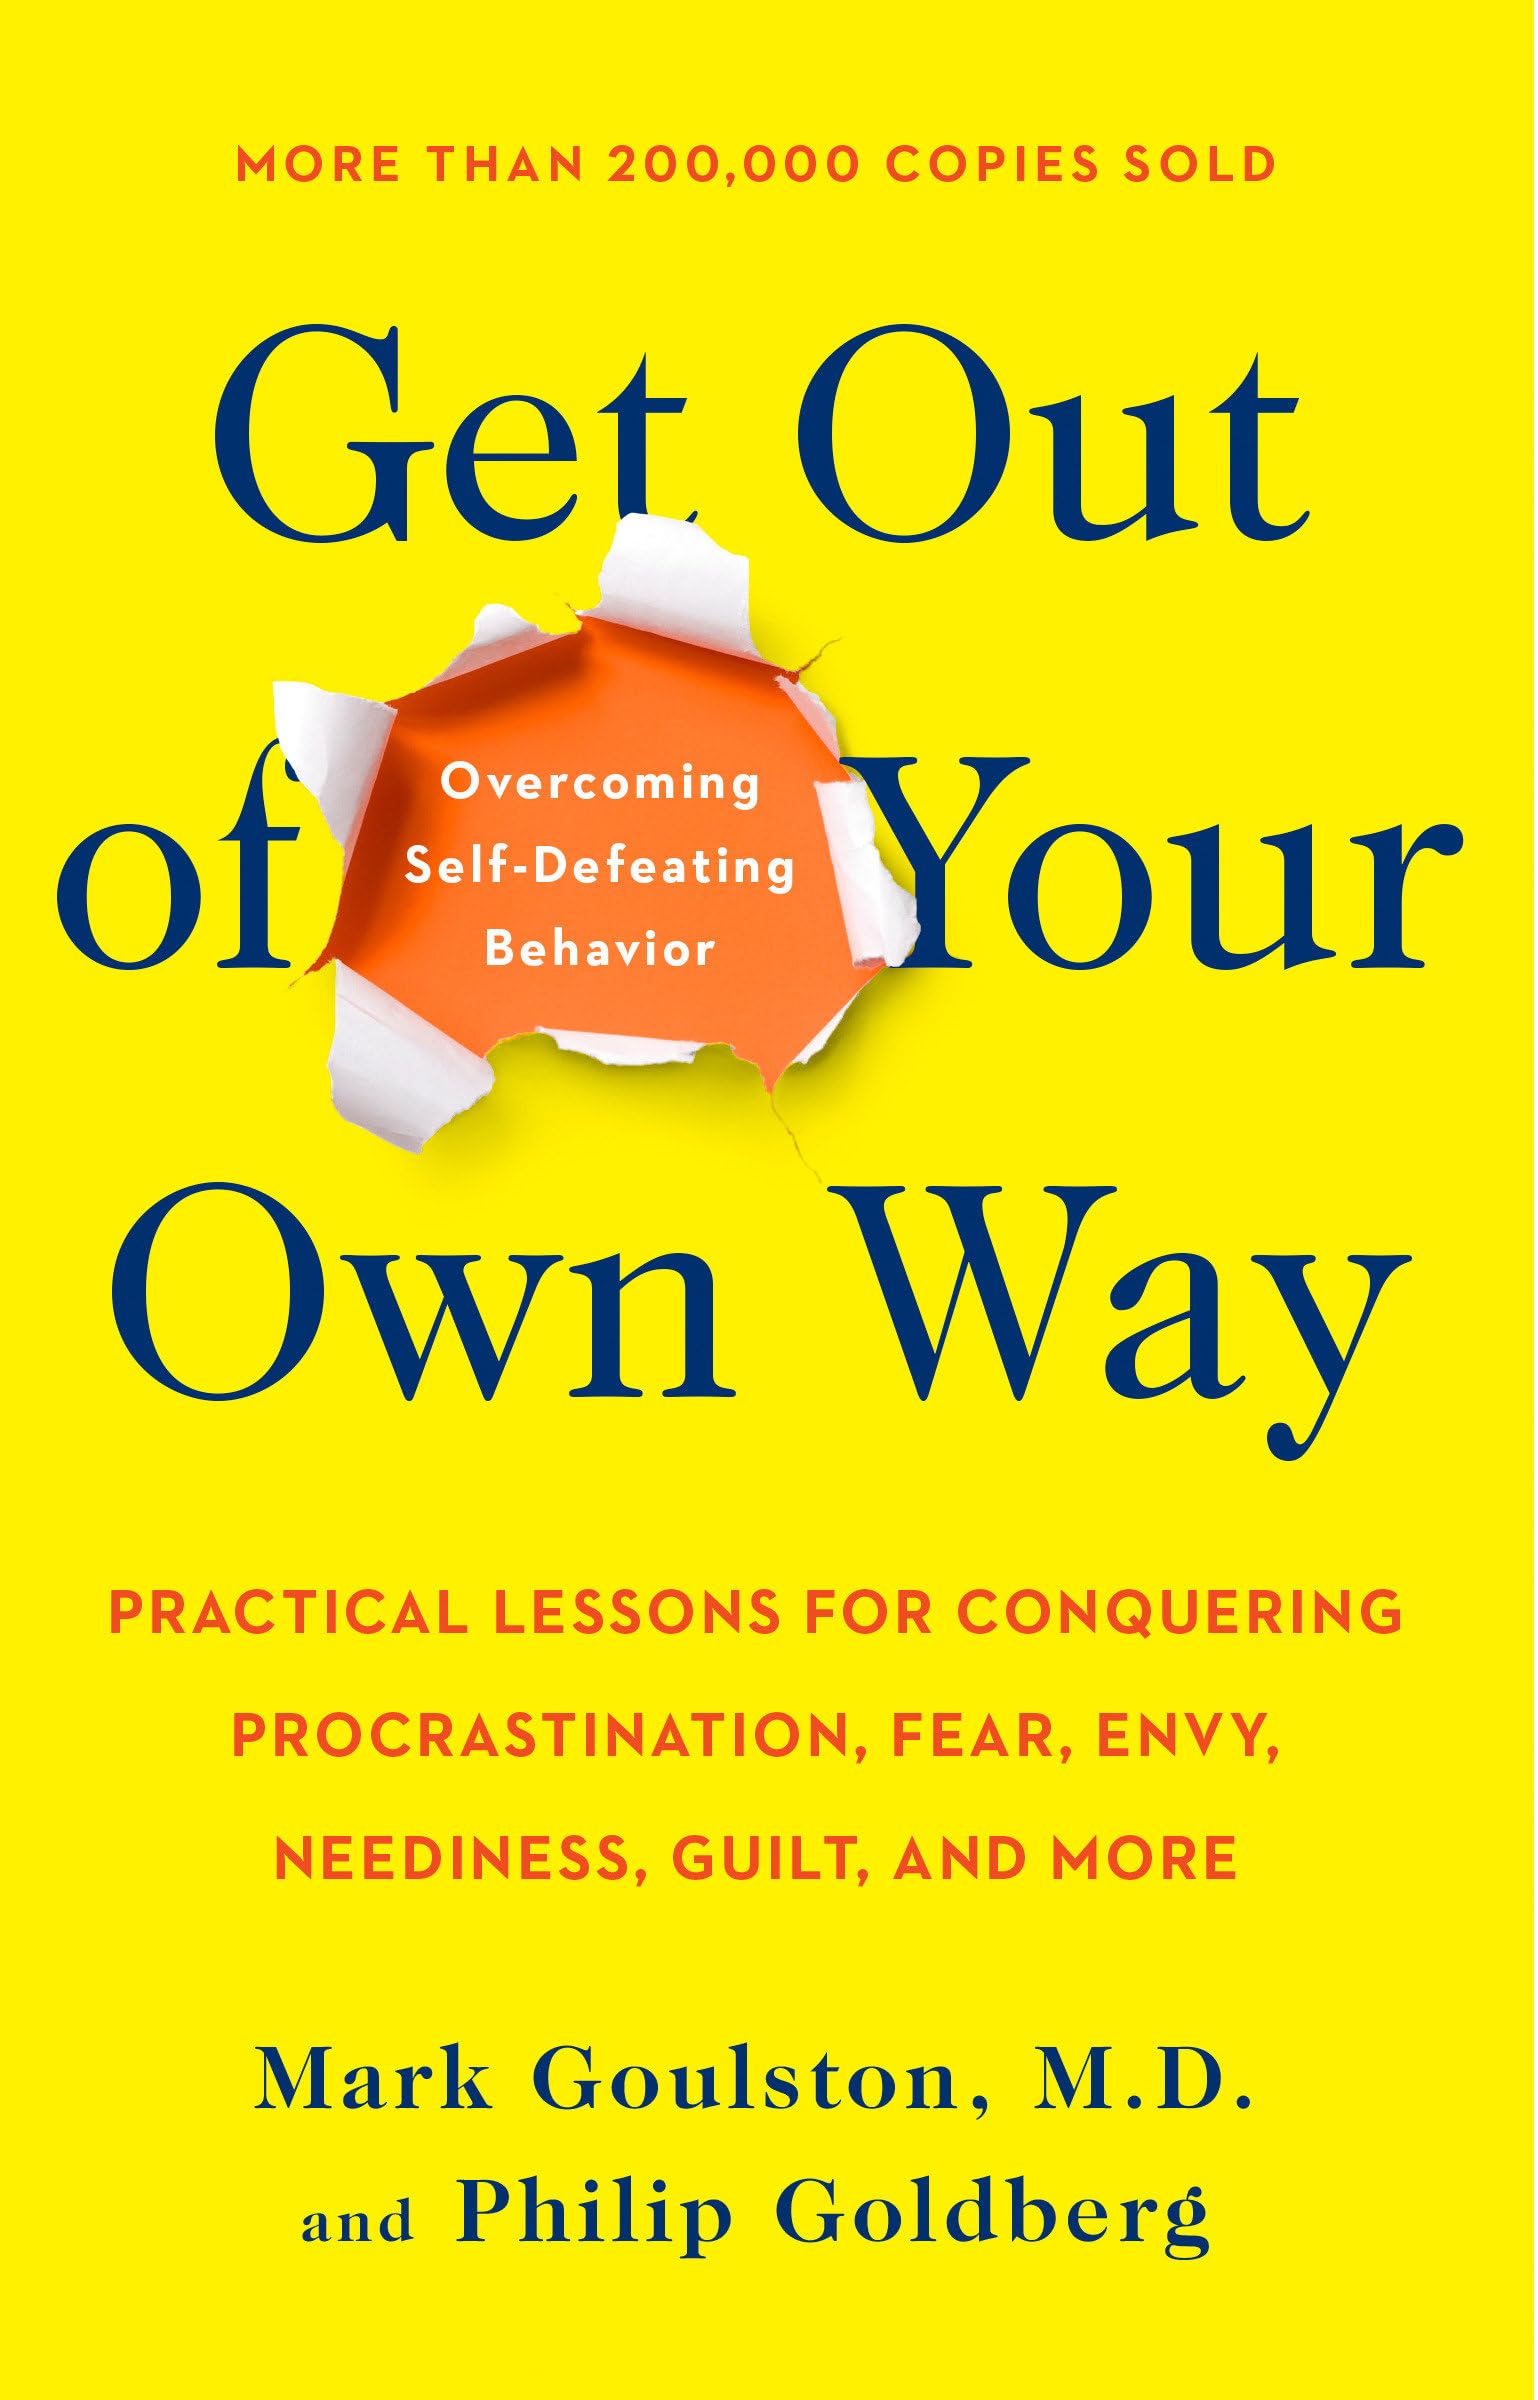 Get Out of Your Own Way: Overcoming Self-Defeating Behavior by Goulston, Mark